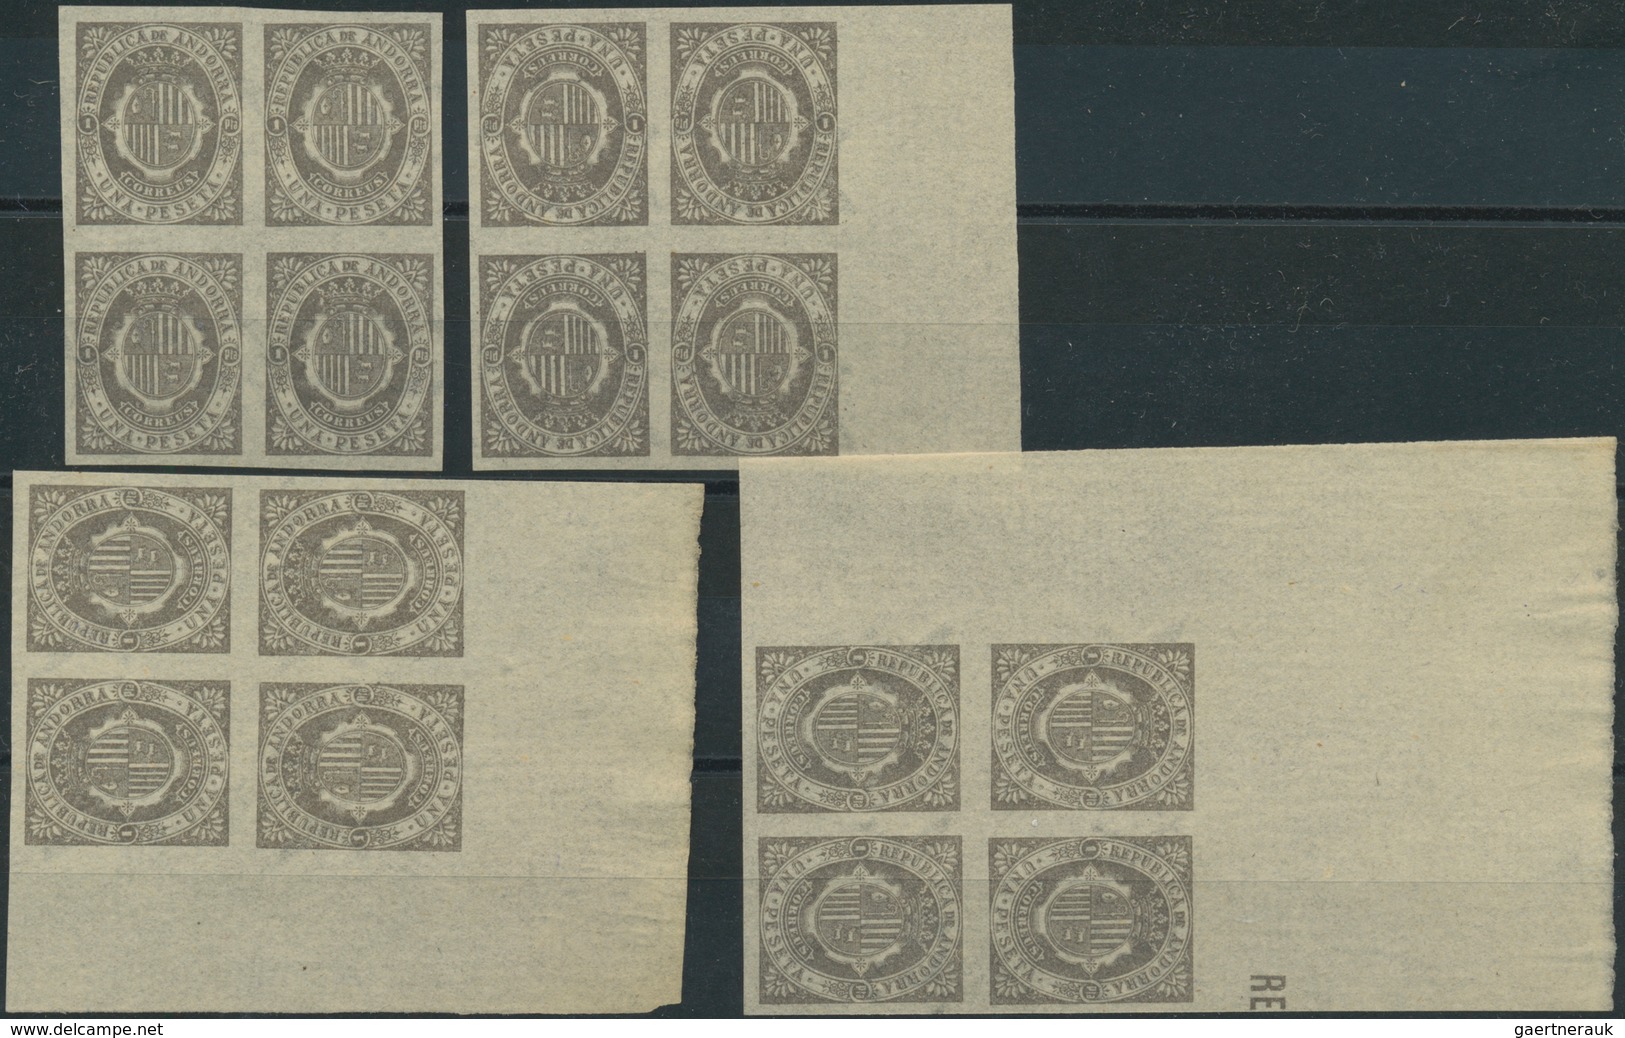 Andorra - Spanische Post: 1896, unissued local issue ‚coat of arms‘ 16 sets of 12 in IMPERFORATED bl